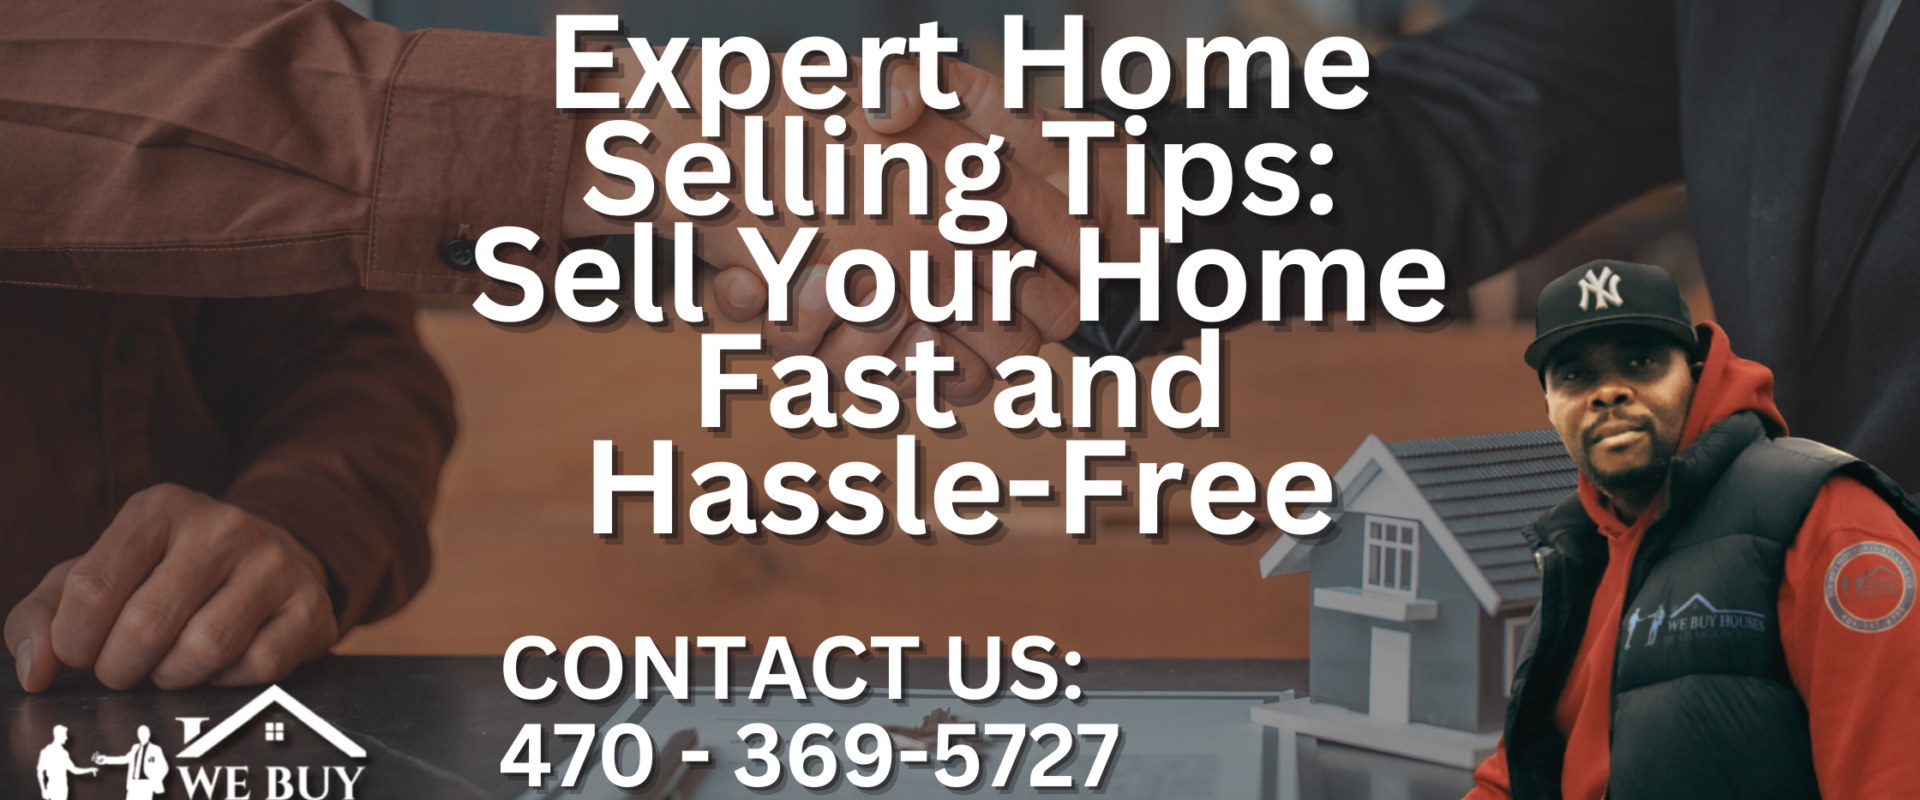 Expert Home Selling Tips: Sell Your Home Fast and Hassle-Free